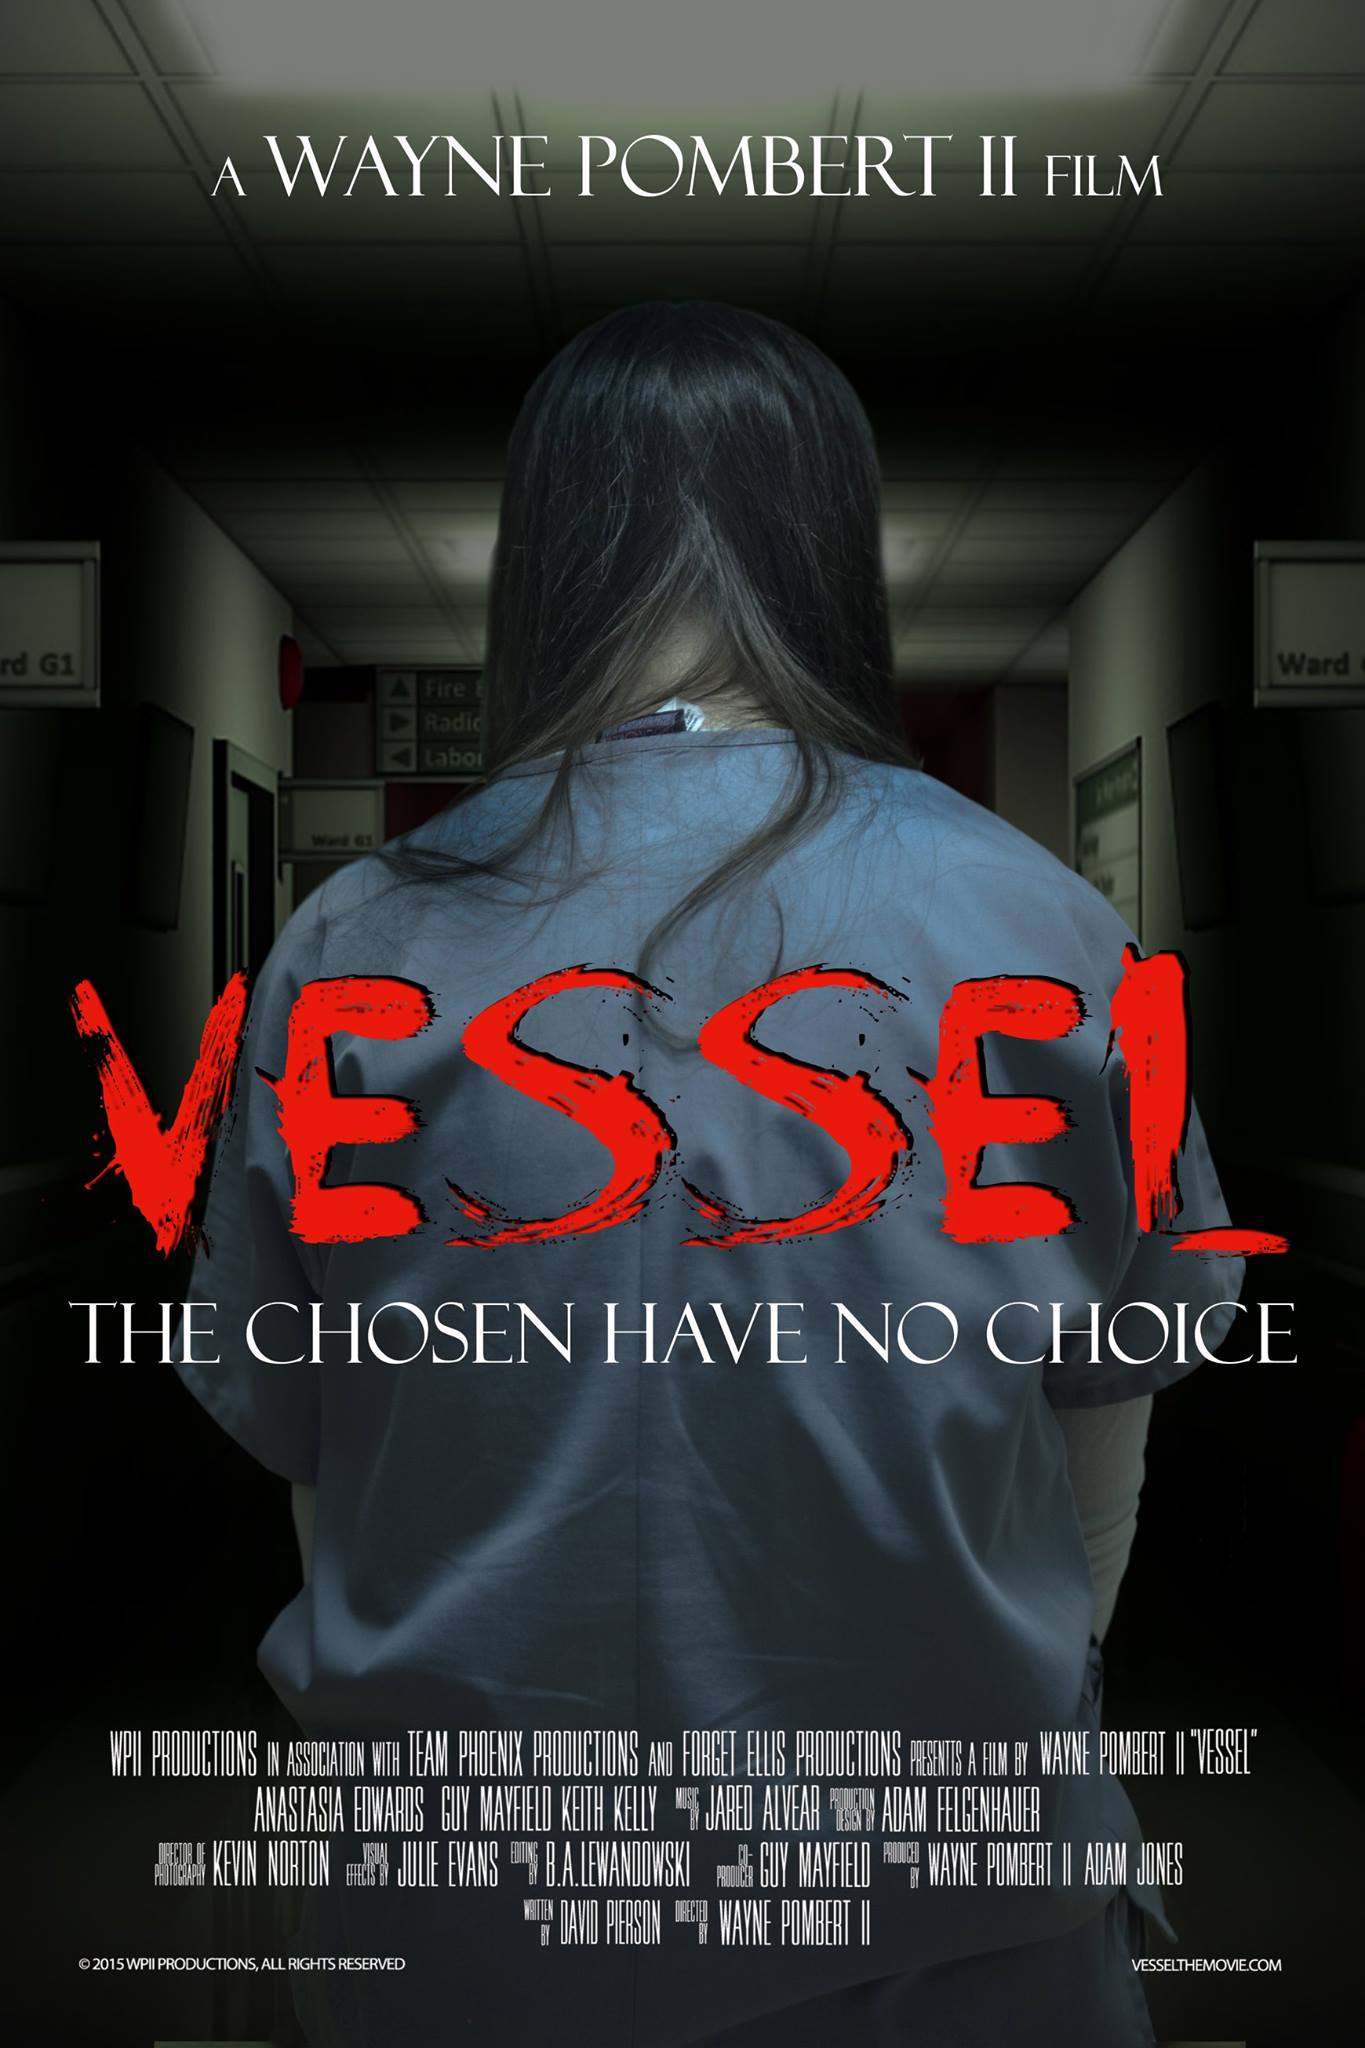 Vessel, with Keith kelly as Dr. Thompson